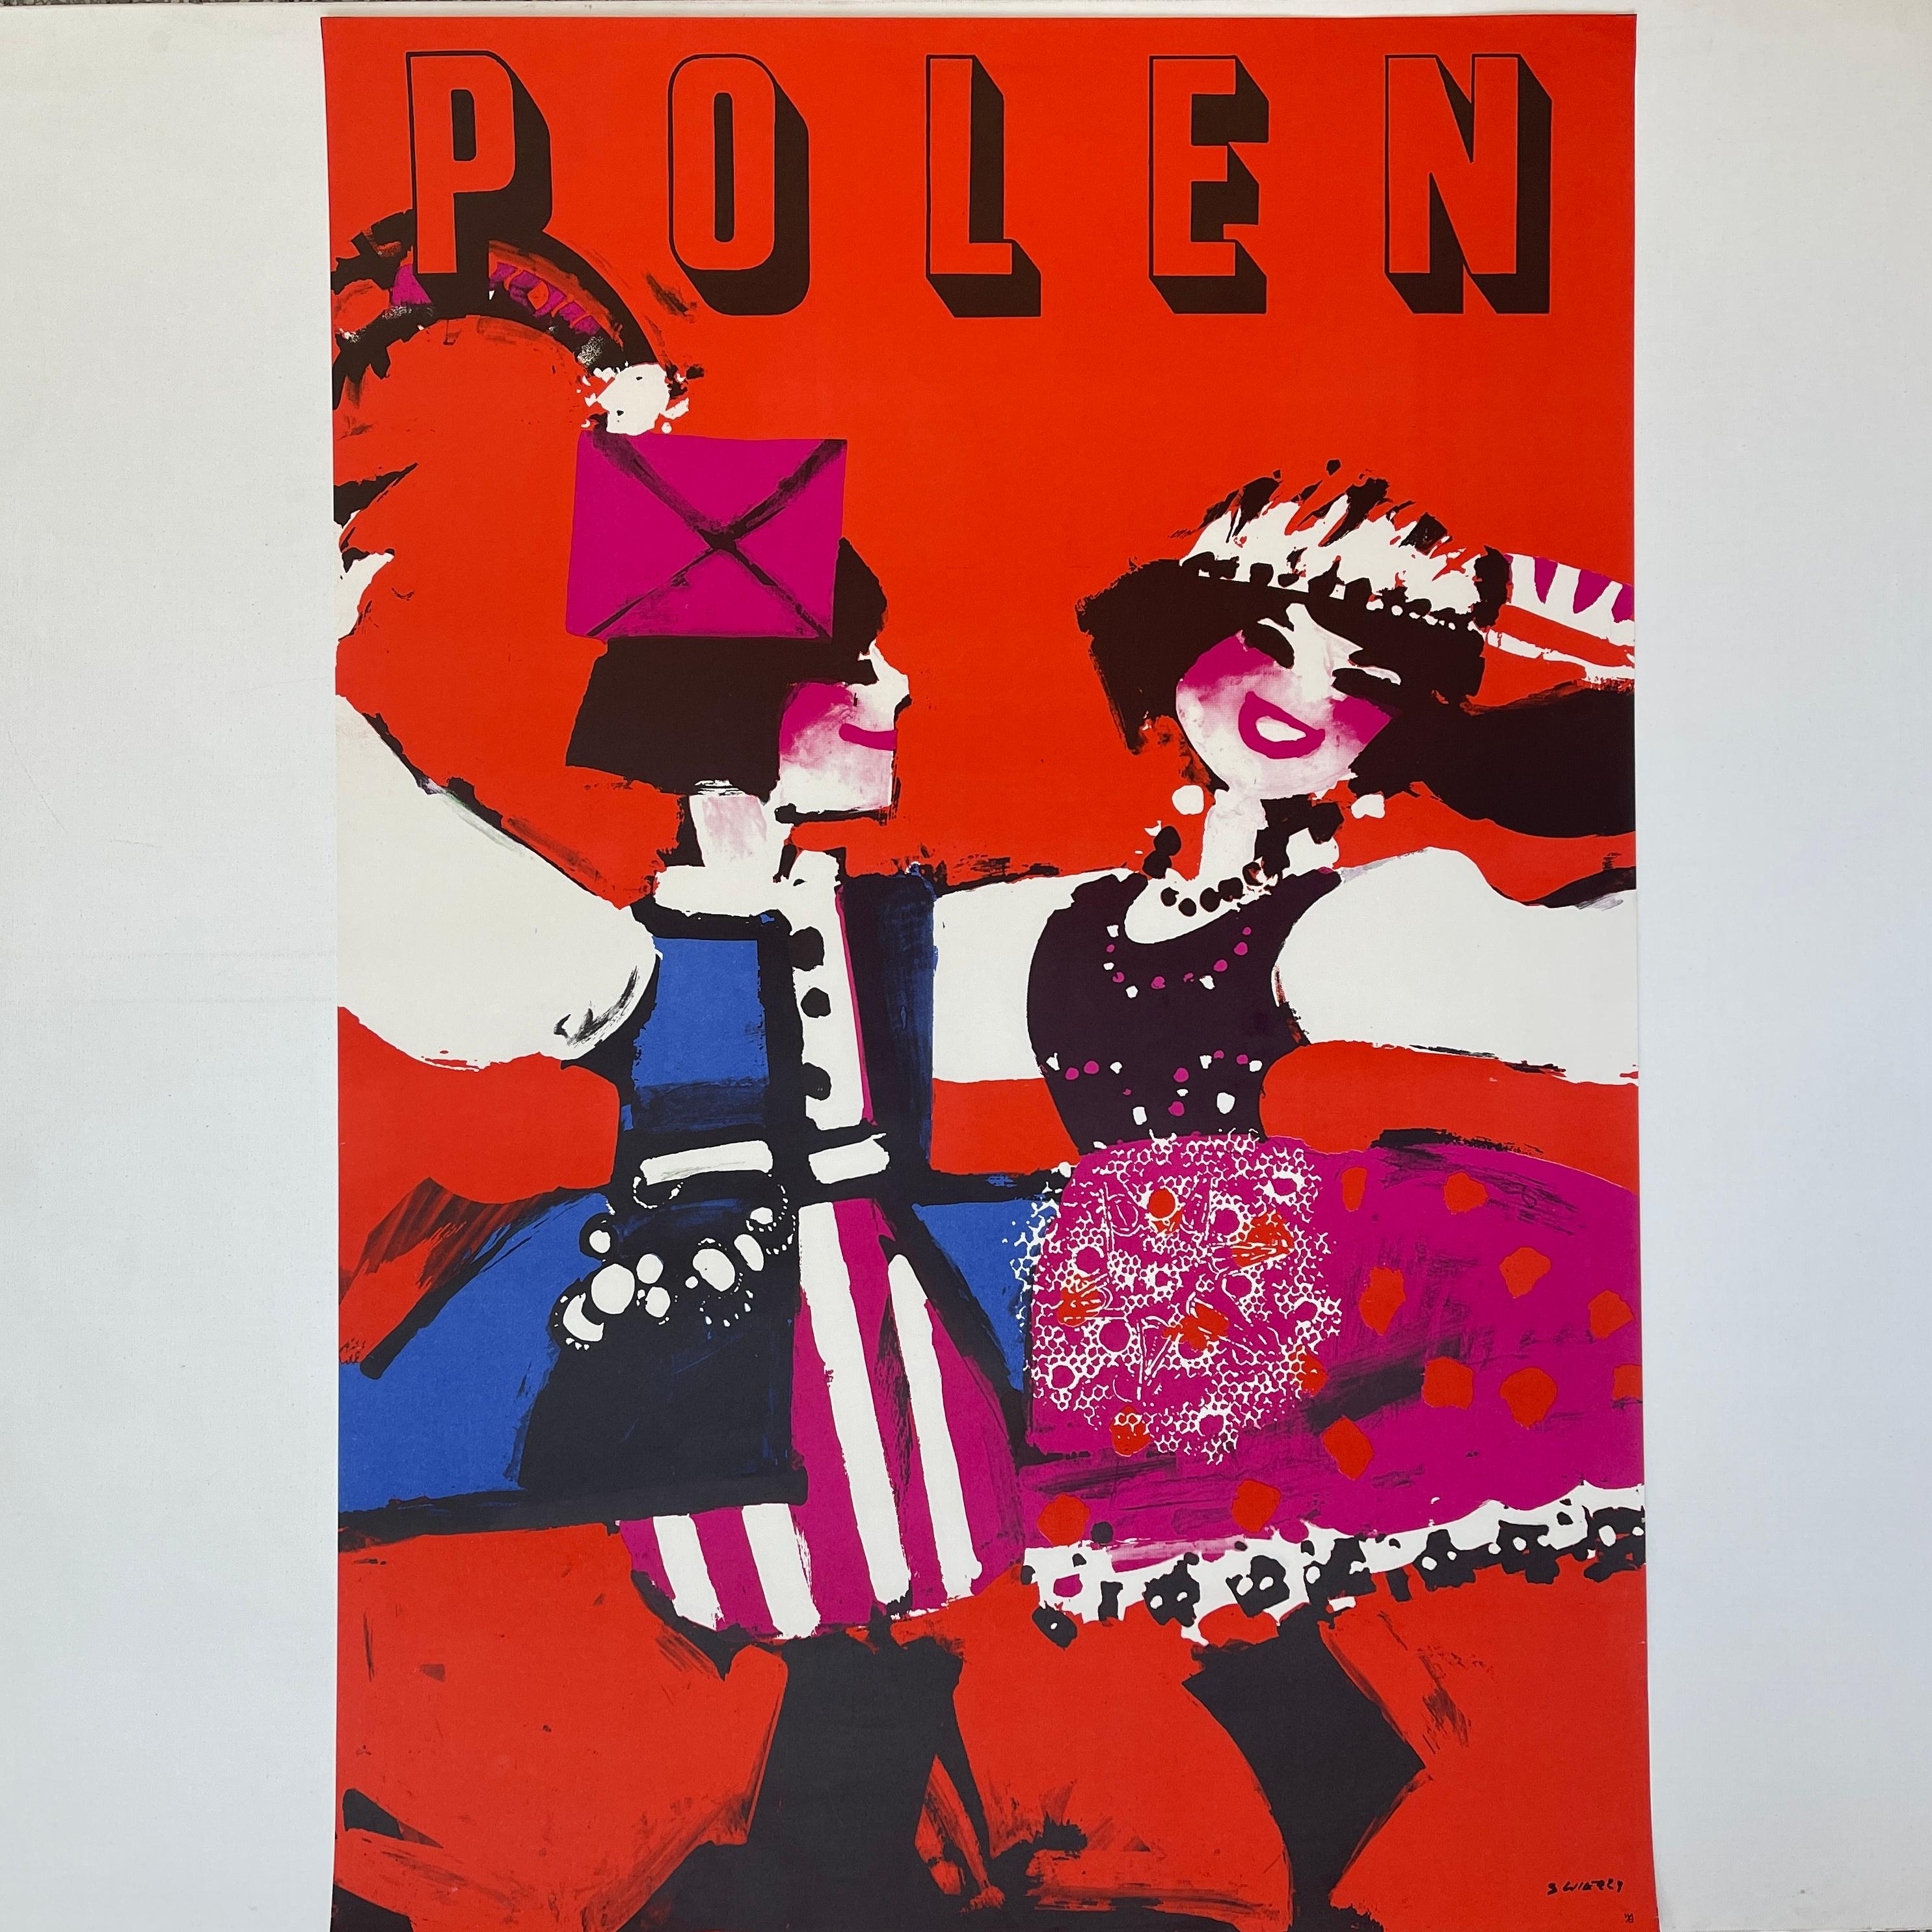 This is an absolutely adorable vintage Polish tourist poster designed by the legendary Polish poster artist Waldemar Swierzy in 1962. It’s in beautiful condition.

Polish B1 size: 67 x 97.5 cm